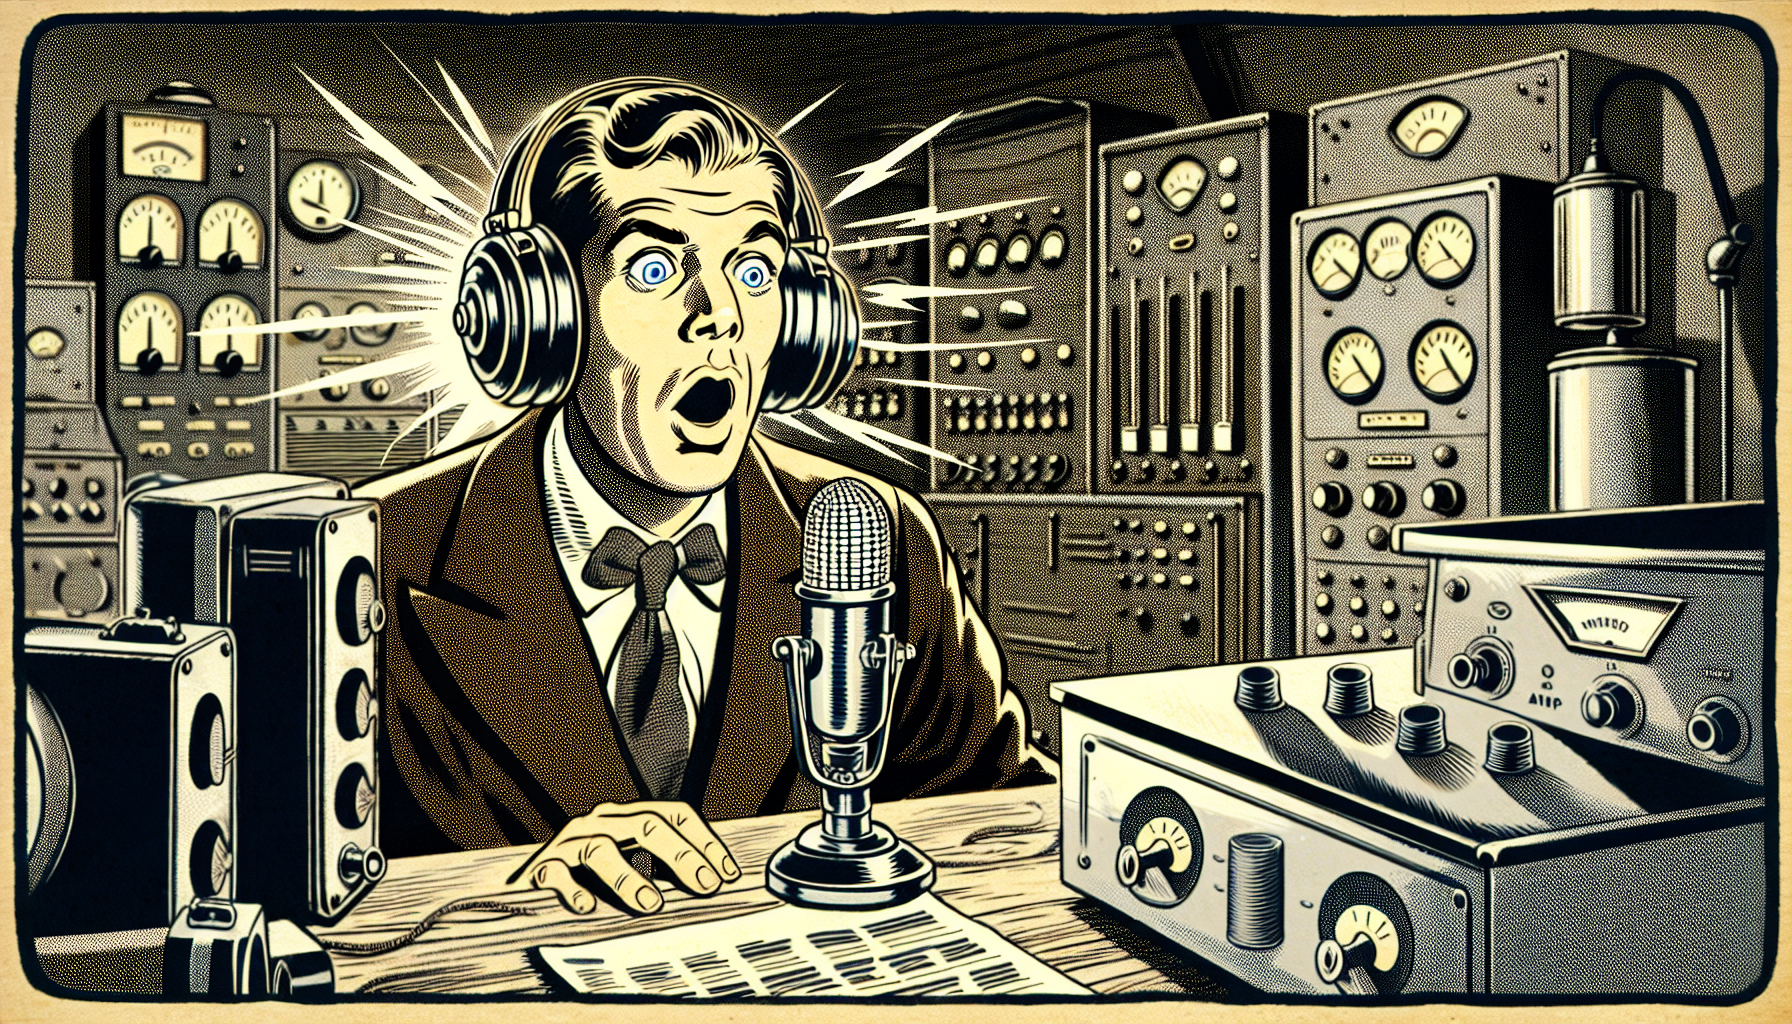 A vintage black and white sound recording studio from the 1950s with an astonished sound engineer listening to the Wilhelm scream through large, retro headphones, surrounded by old-fashioned audio equ